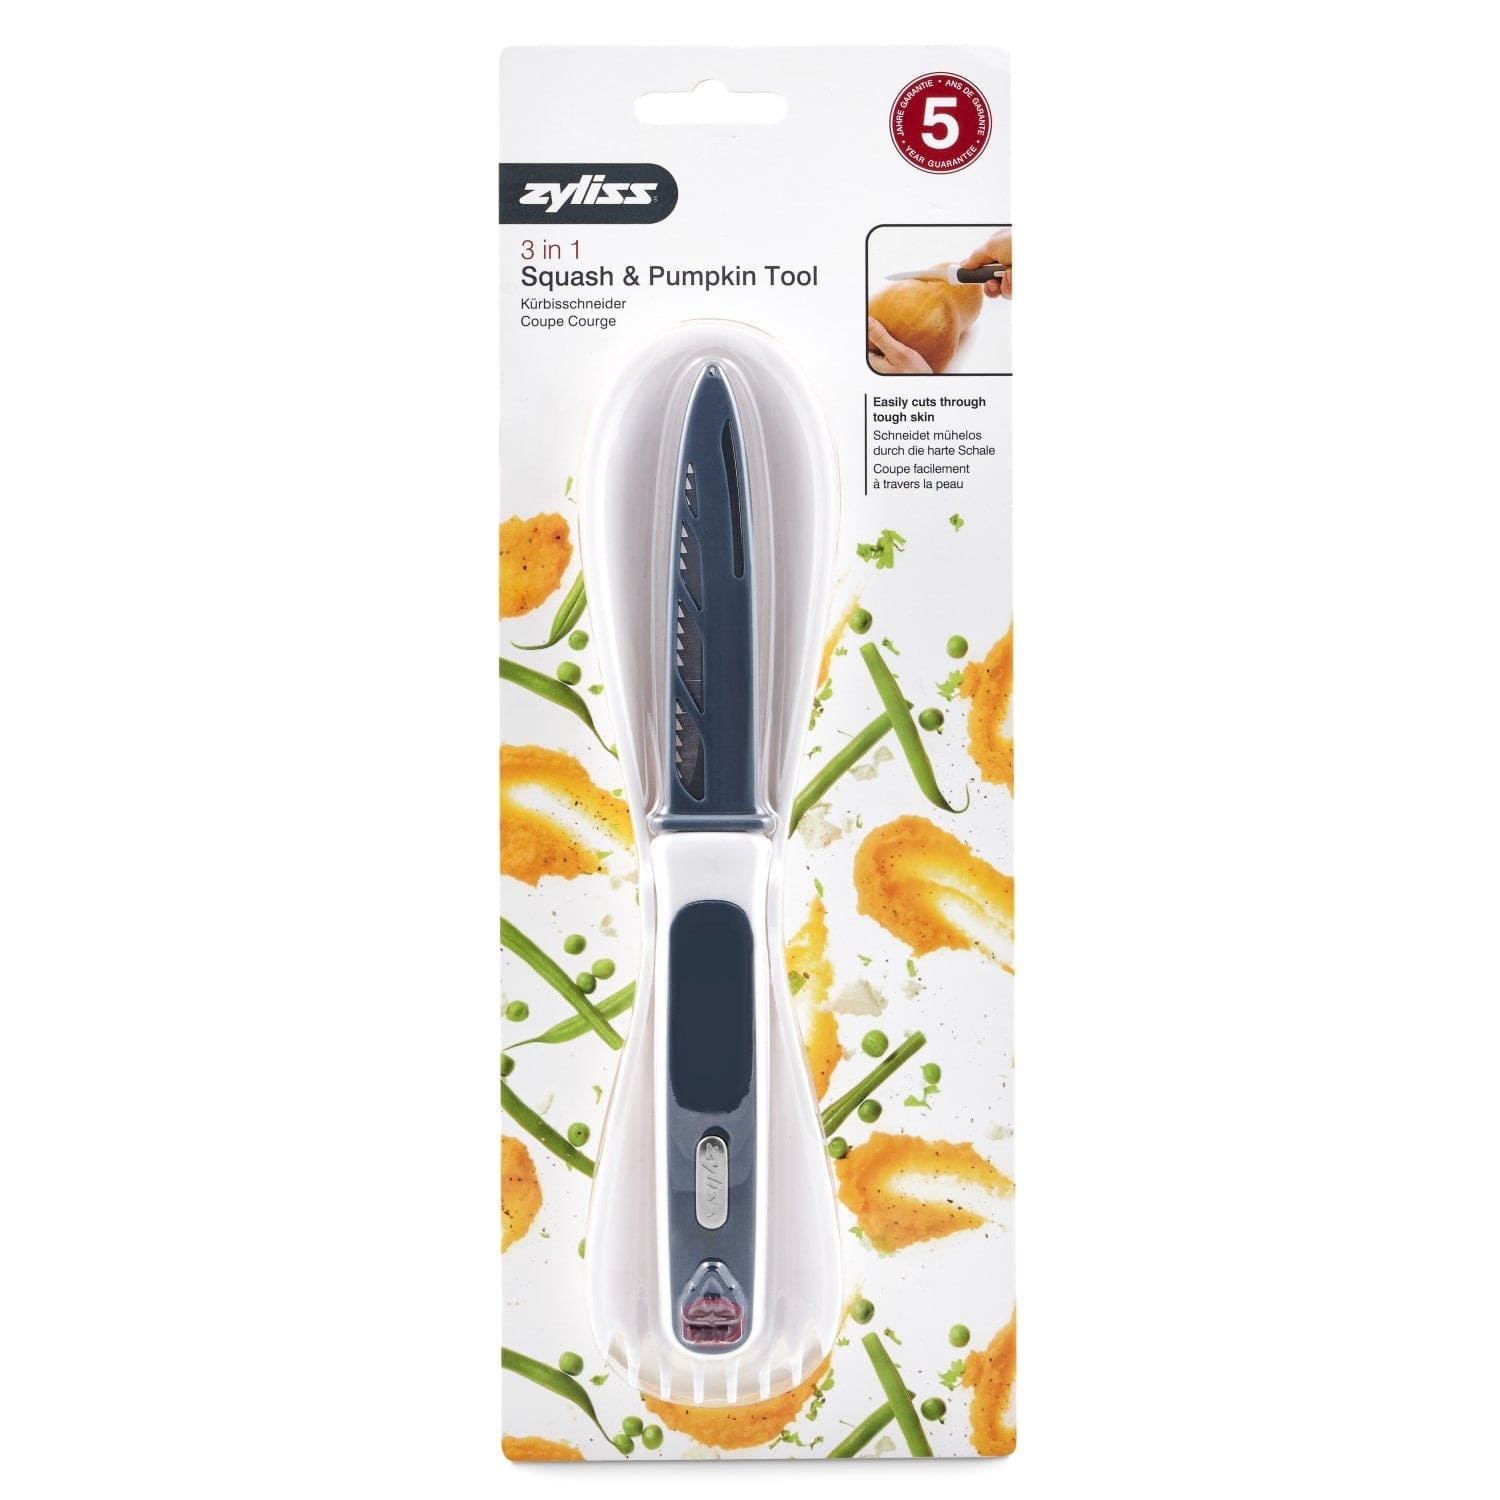 Zyliss 3 in 1 Squash or Pumpkin Peeling, Carving & Scooping Tool Zyliss Peel & Grate Ginger Tool - Discontinued